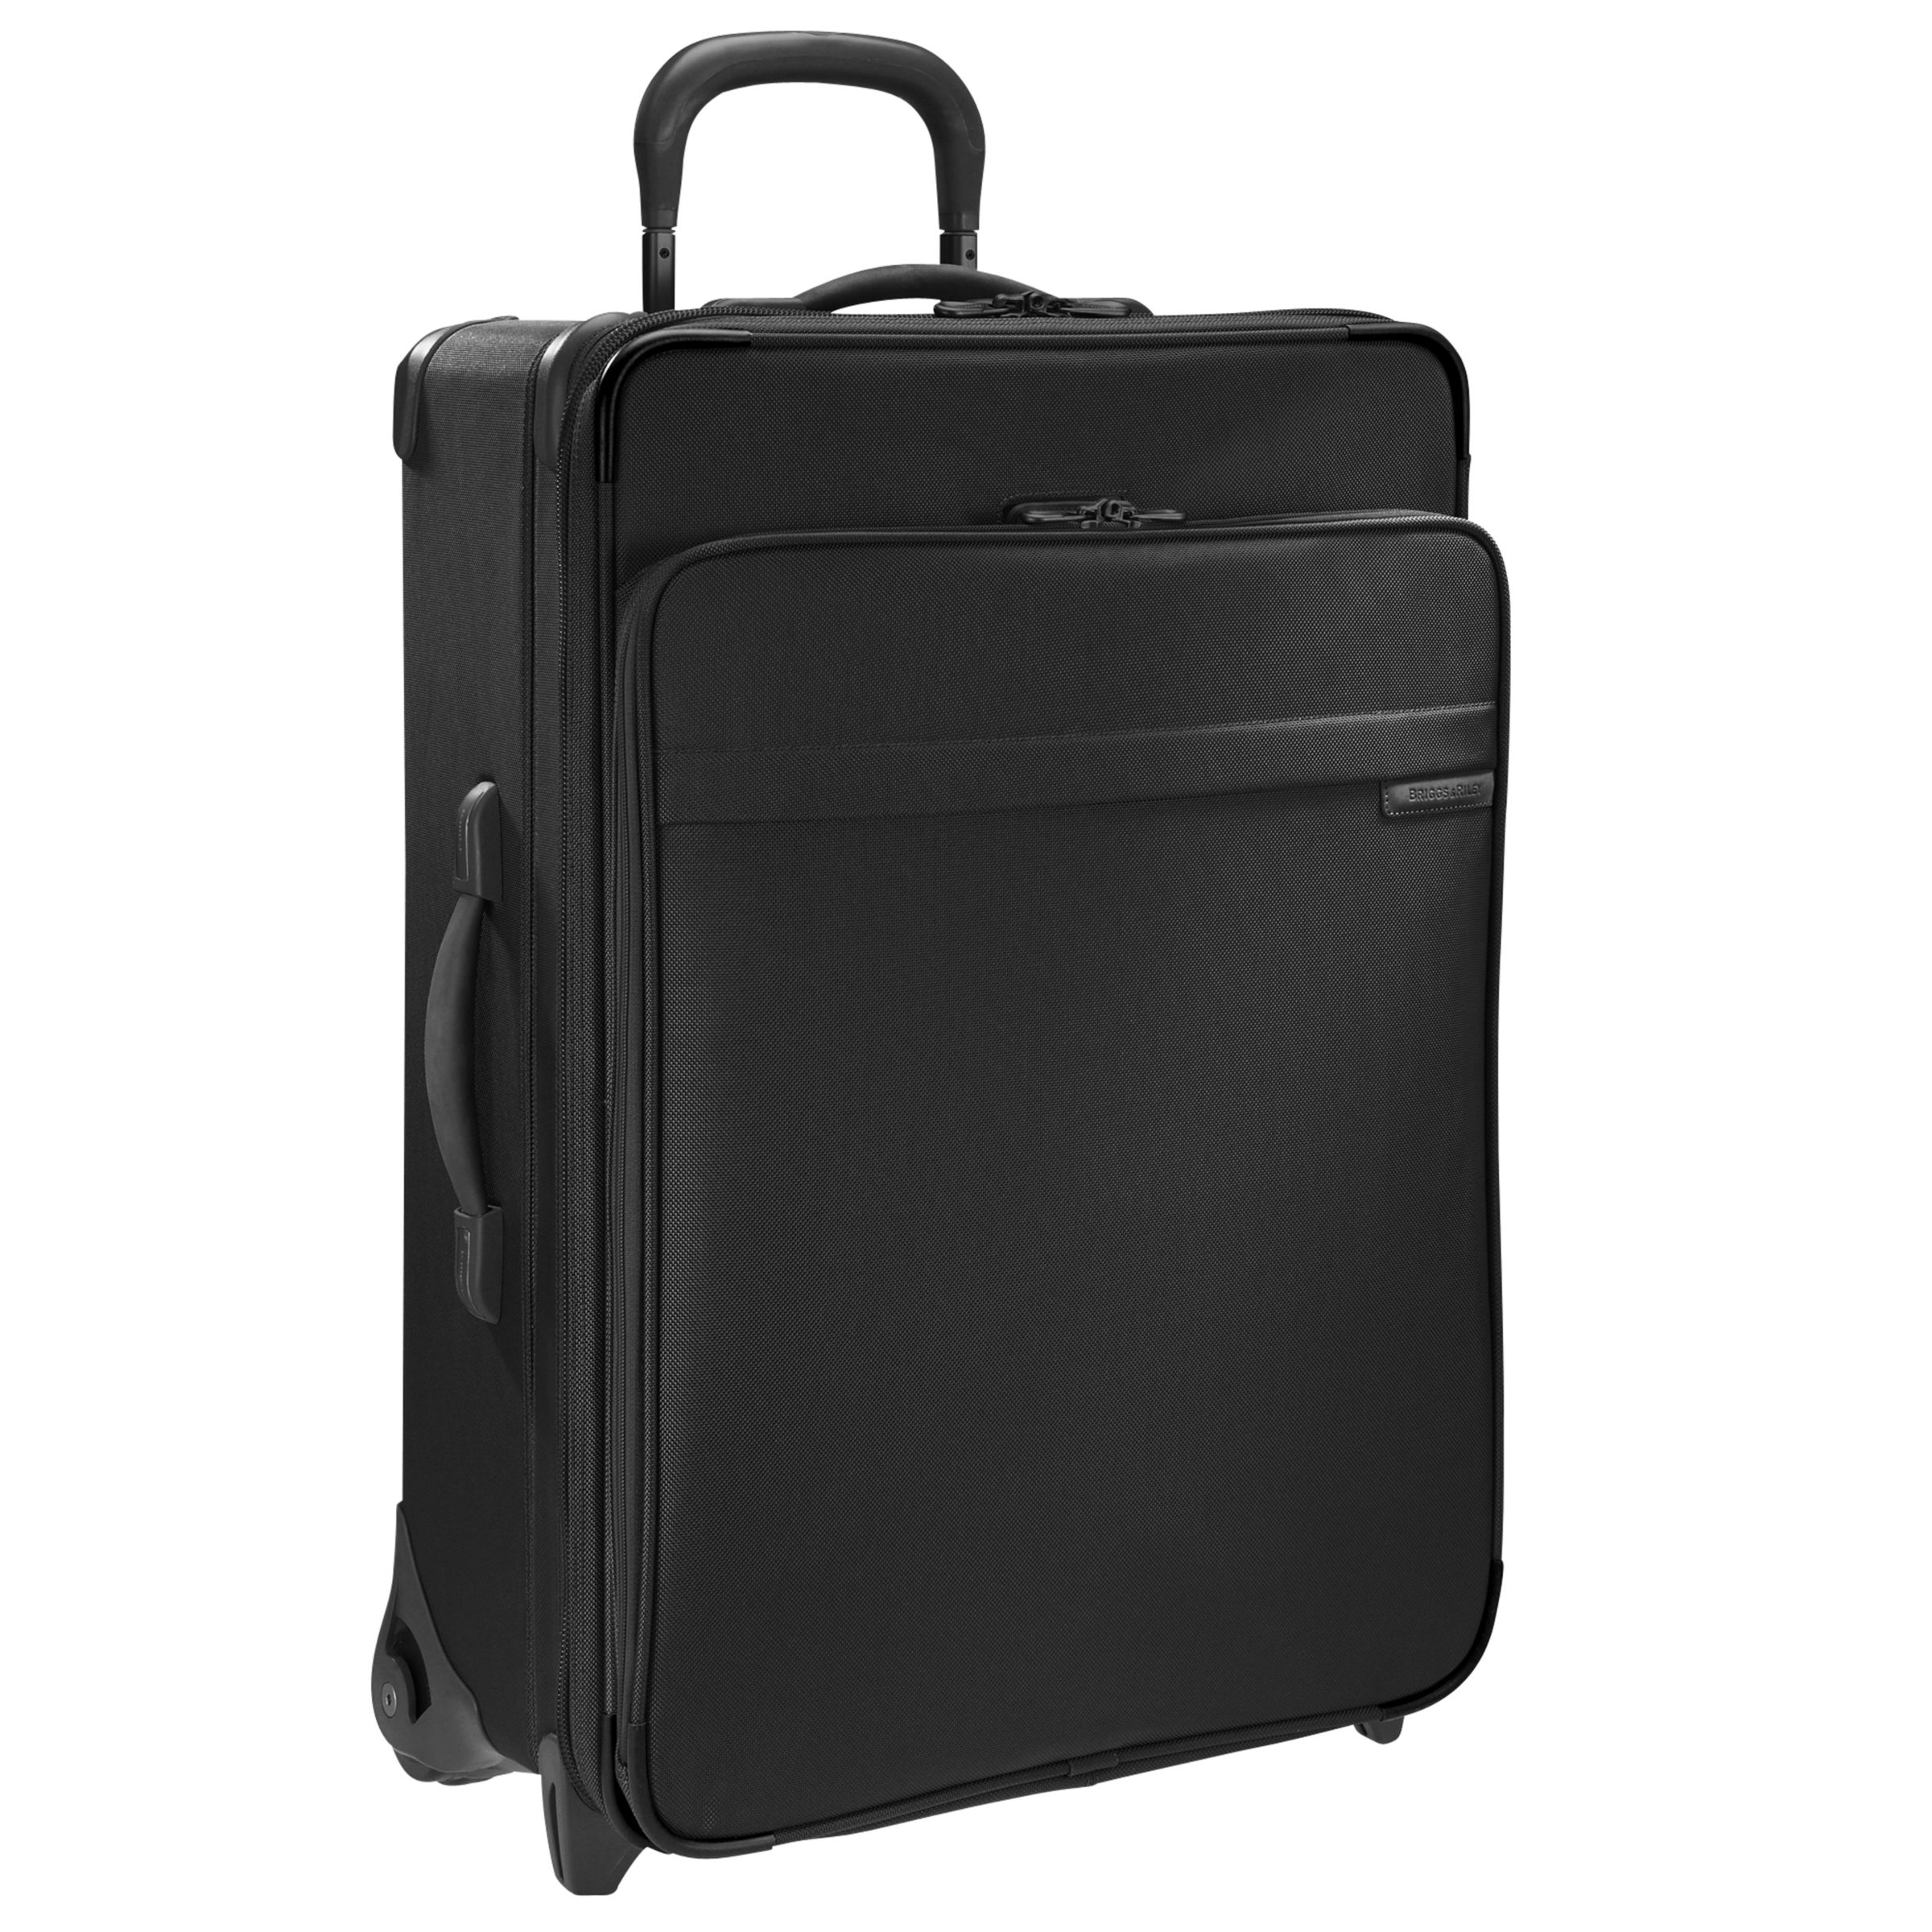 Briggs & Riley Expandable Trolley Cases, Black at John Lewis